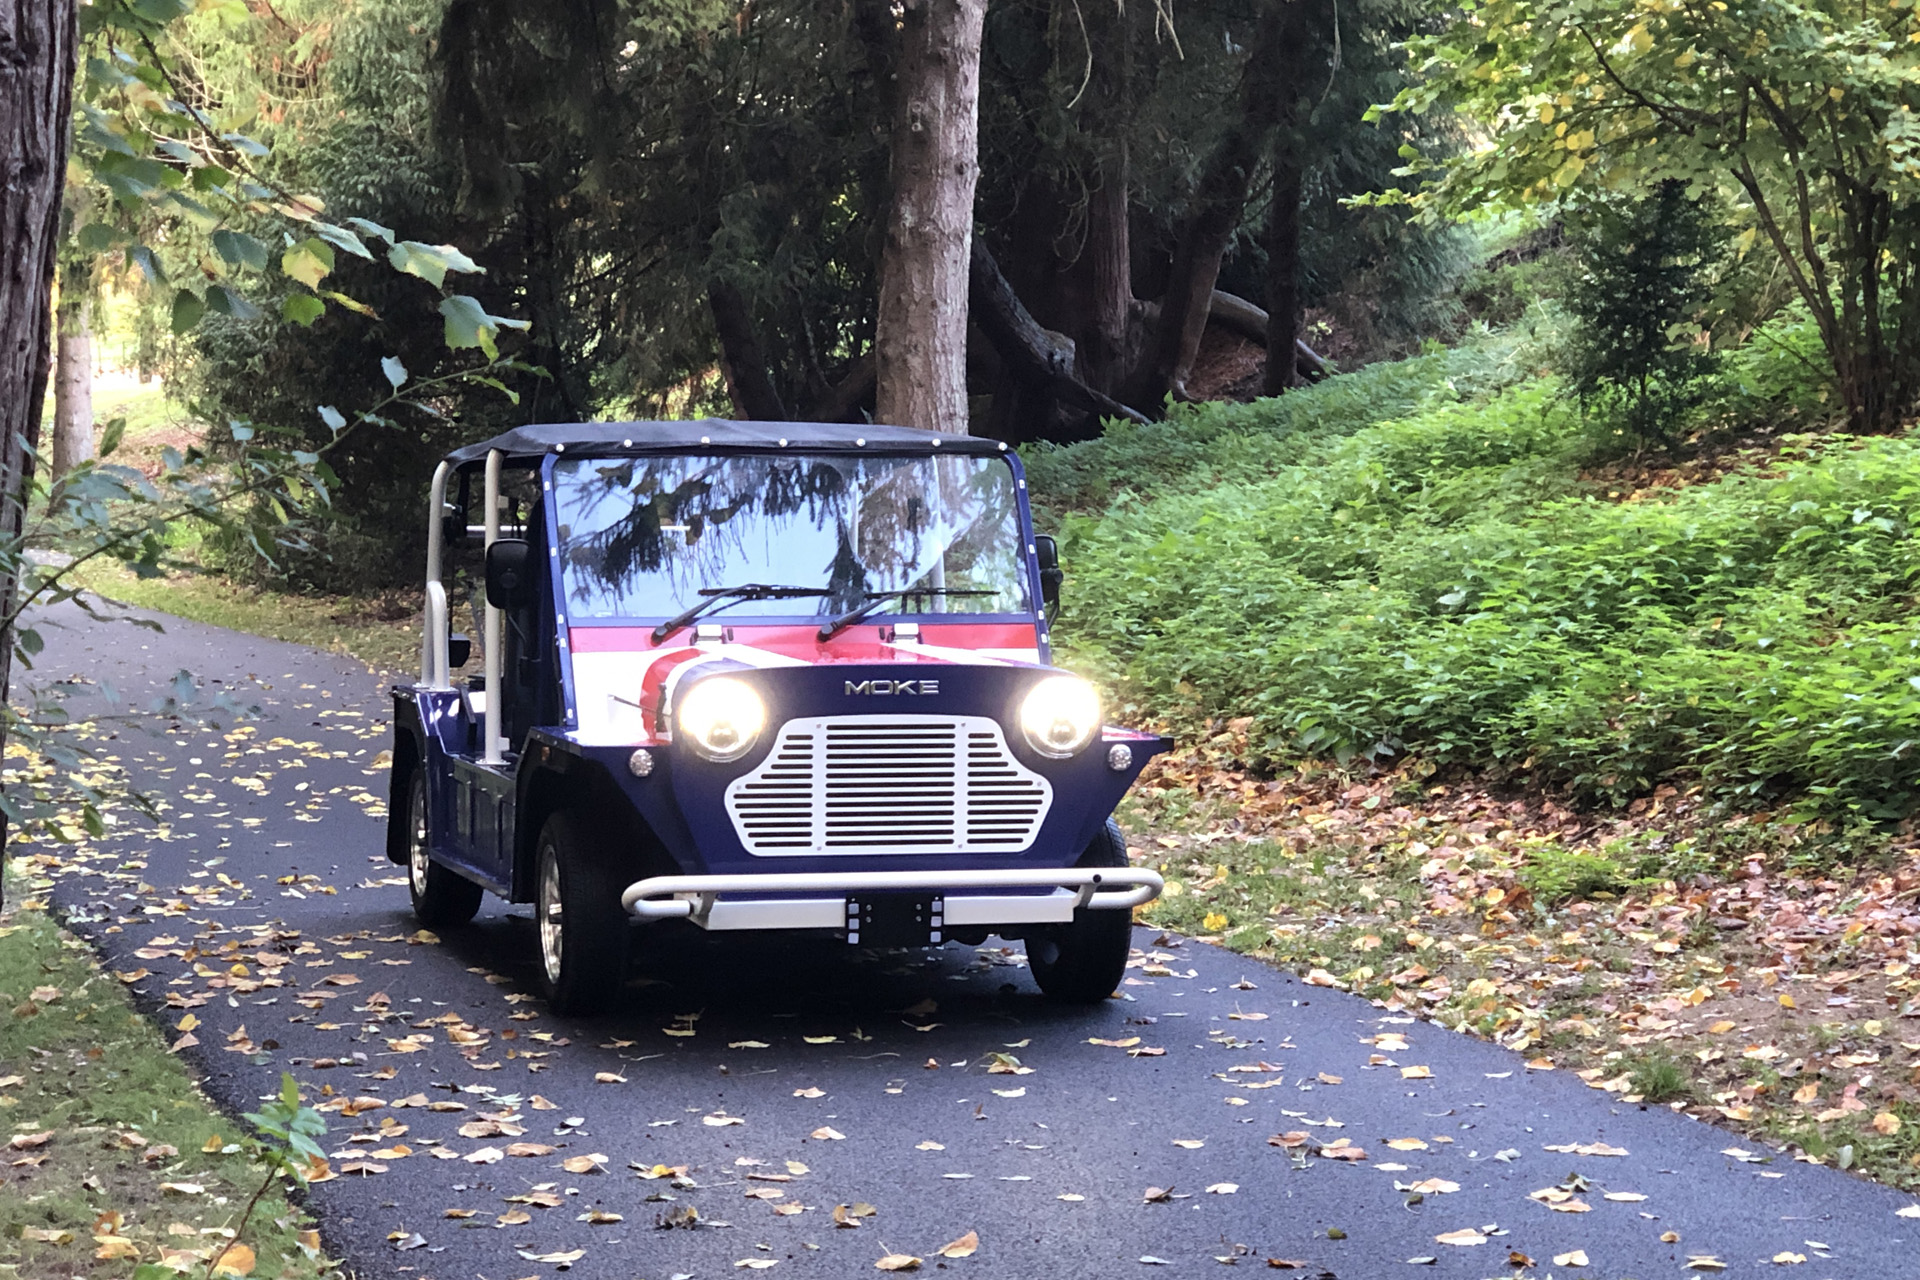 the electric moke car on a leafy road